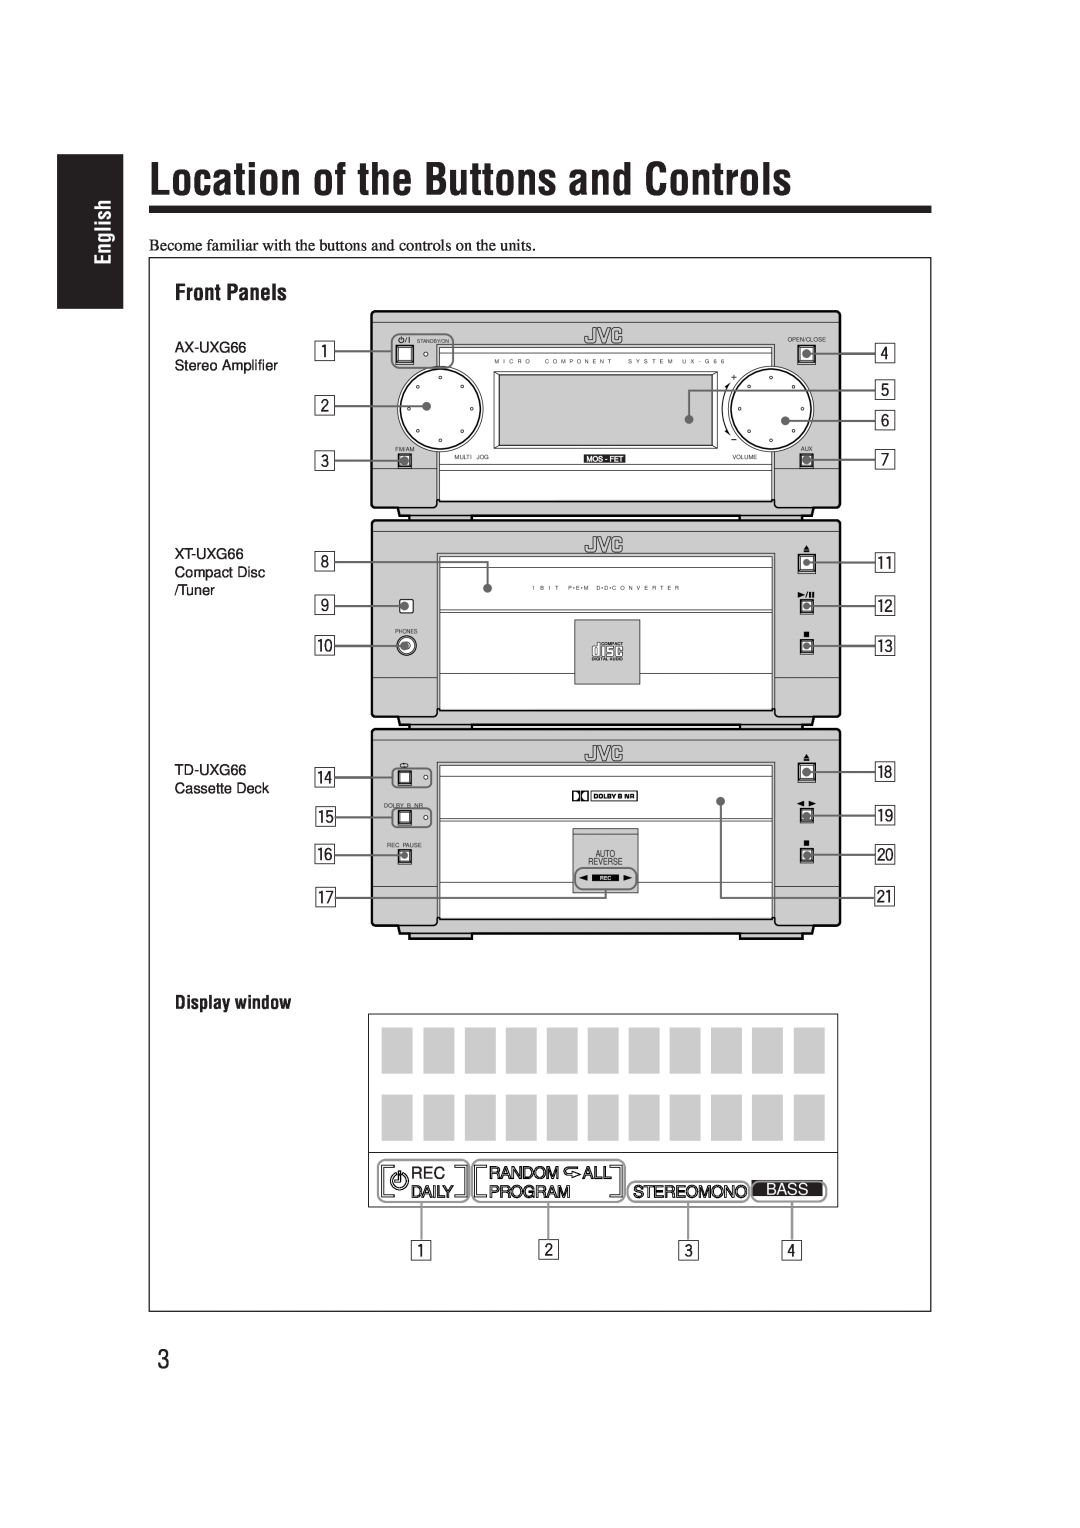 JVC TD-UXG66, SP-UXG66, XT-UXG66, AX-UXG66 manual Location of the Buttons and Controls, Front Panels, English 